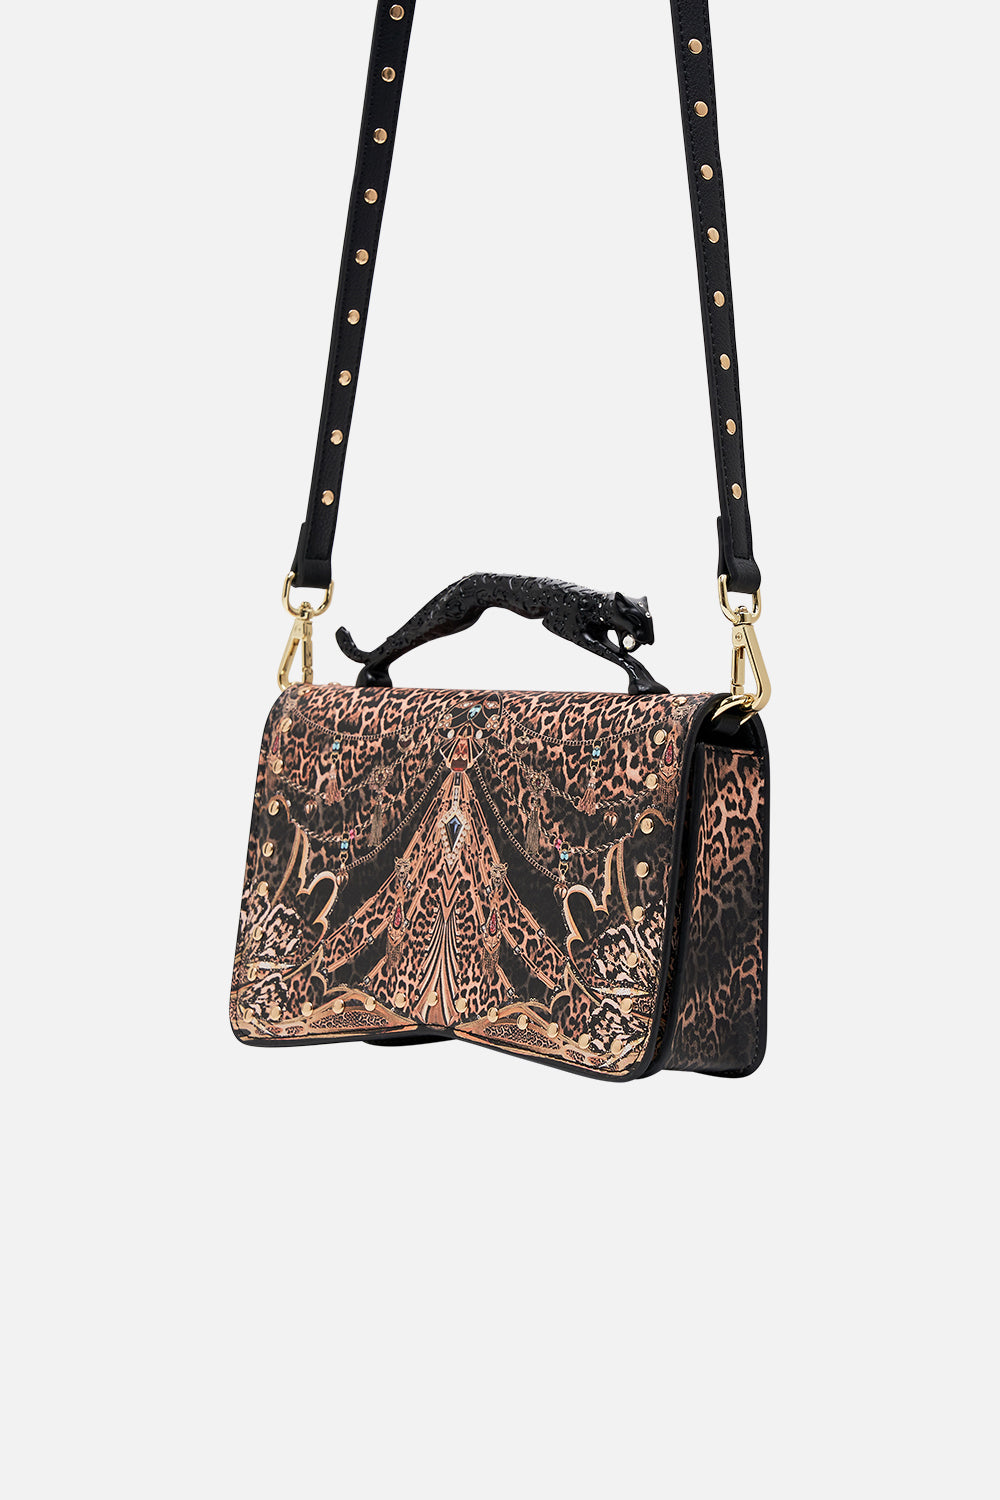 CAMILLA leopard east west bag with leopard handle in Amsterglam